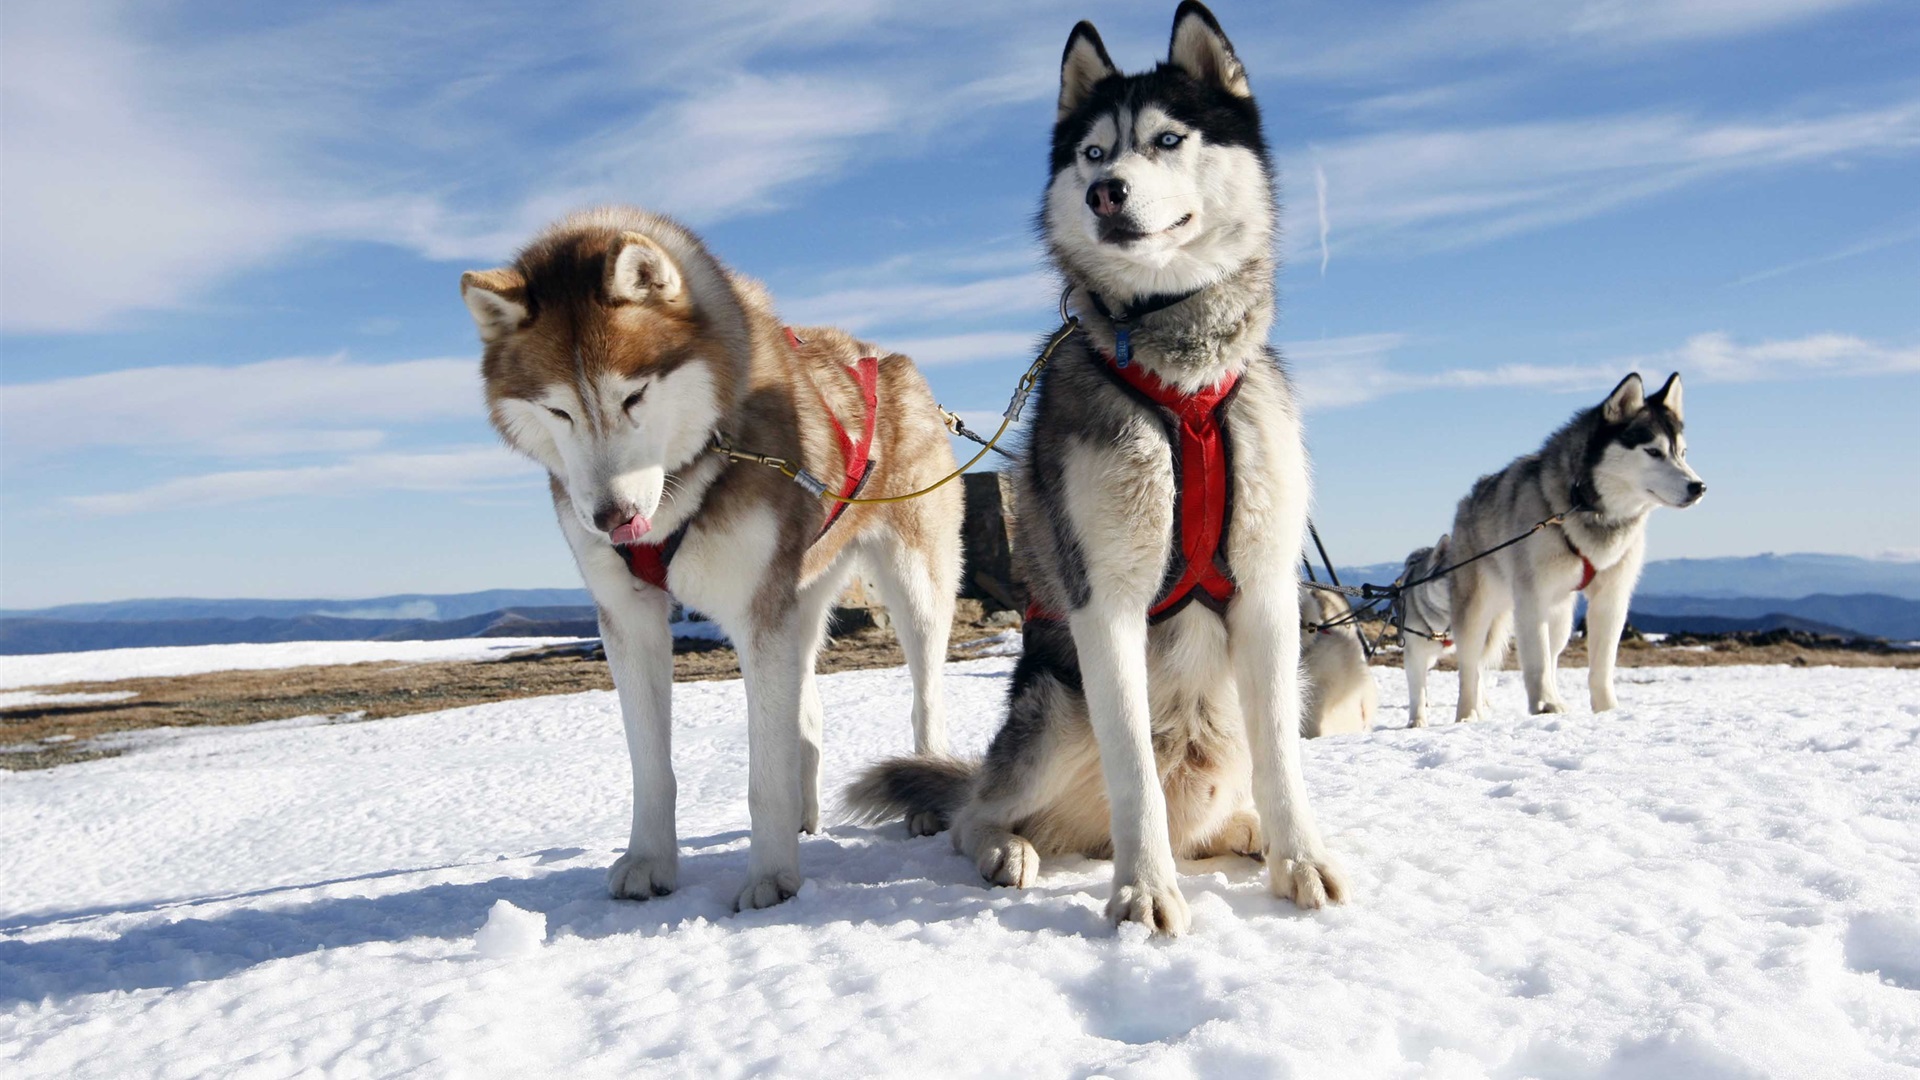 Wallpaper Dog Sledding Snow Sky Cold HD Picture Image